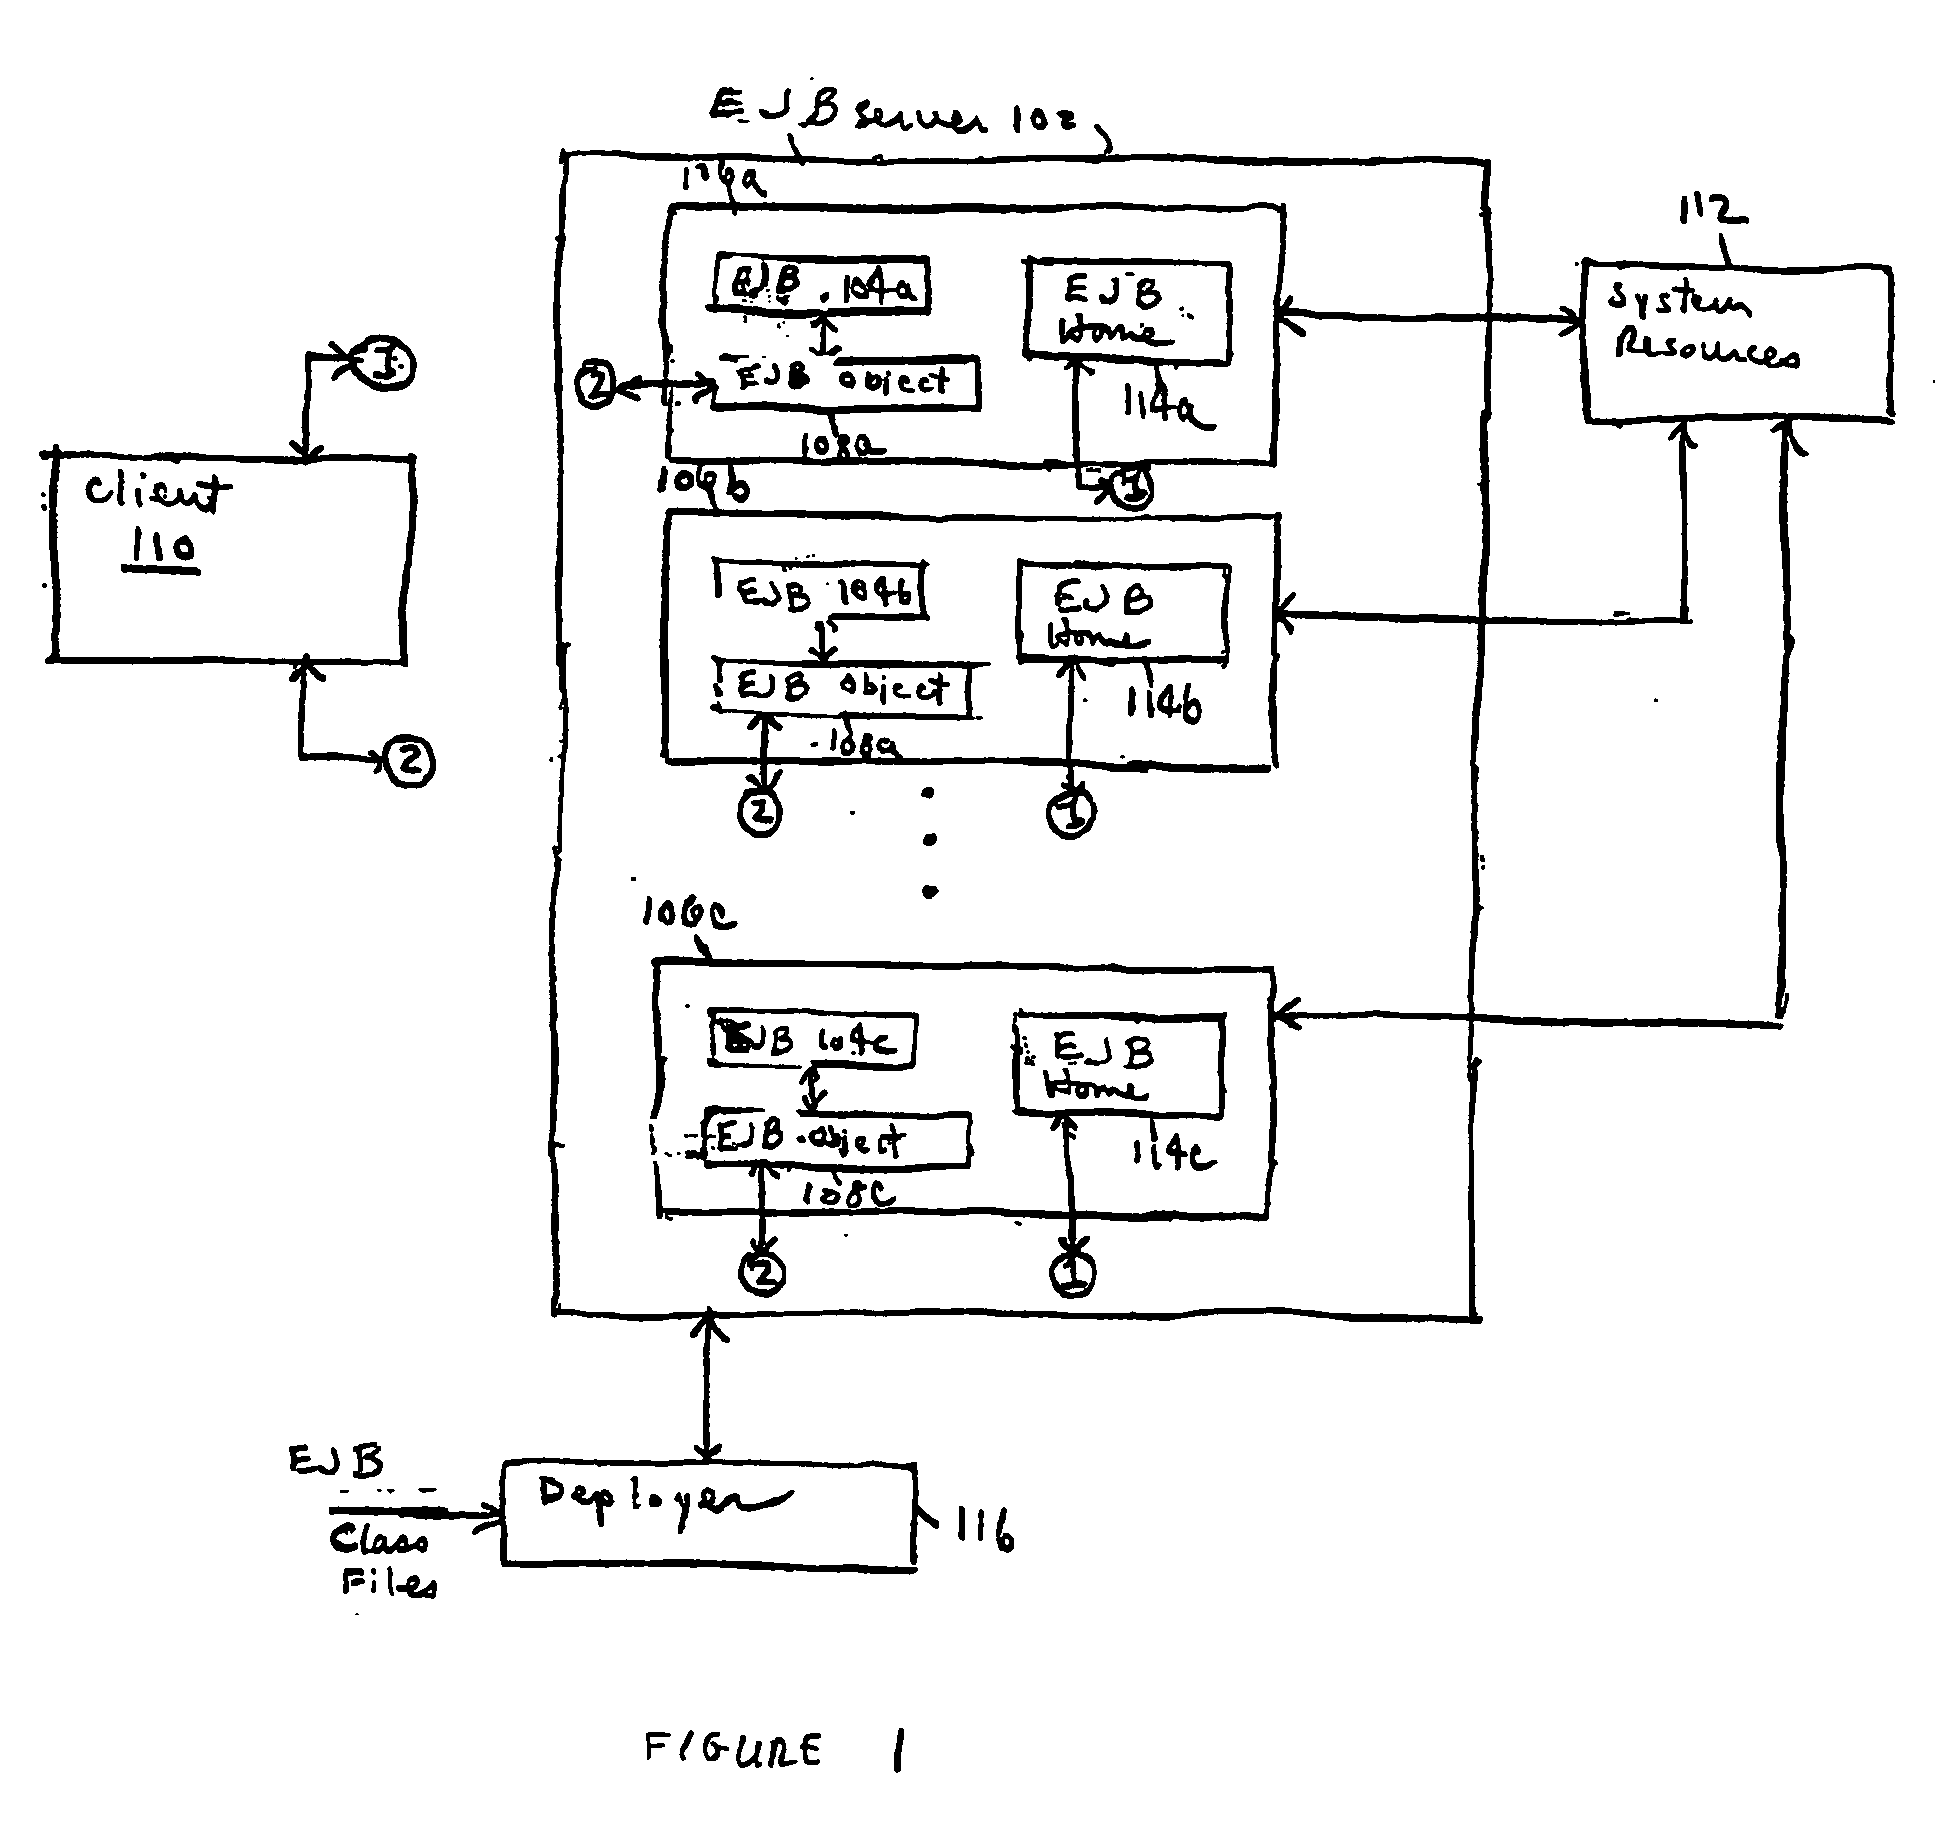 Systems and method for the incremental deployment of Enterprise Java Beans